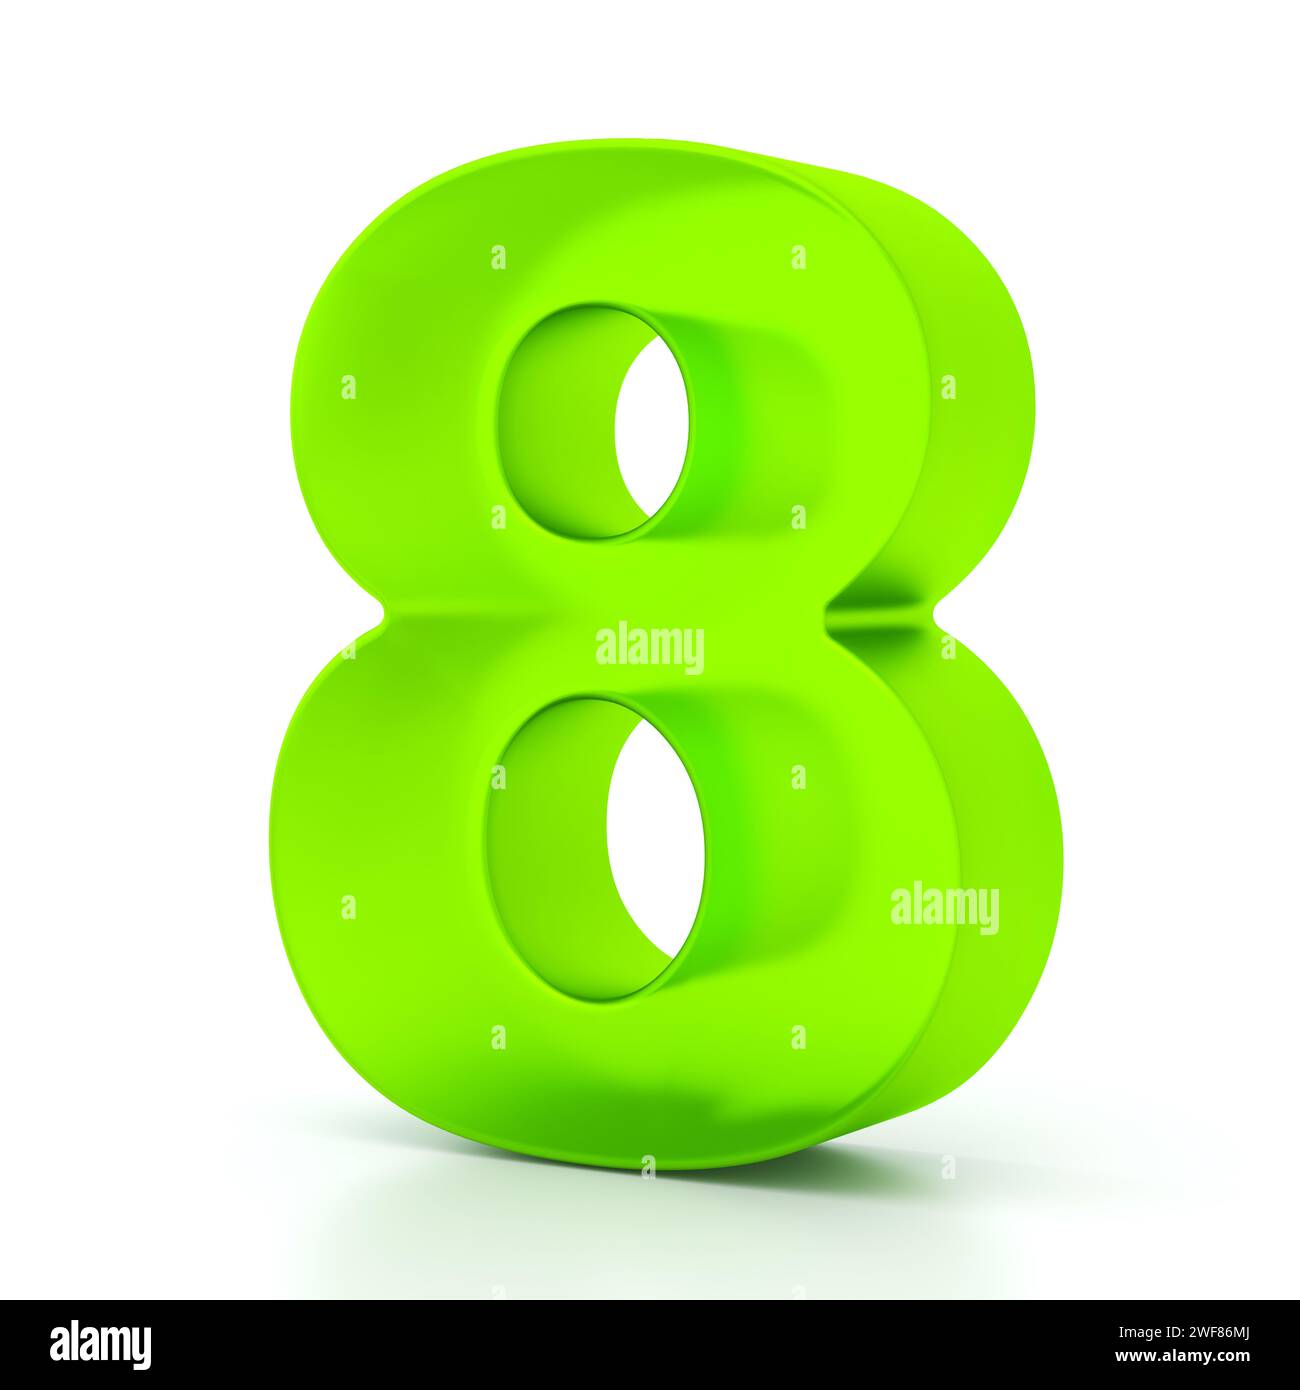 Number eight with green glass material. 3d symbol for graphic design, presentation or background Stock Photo